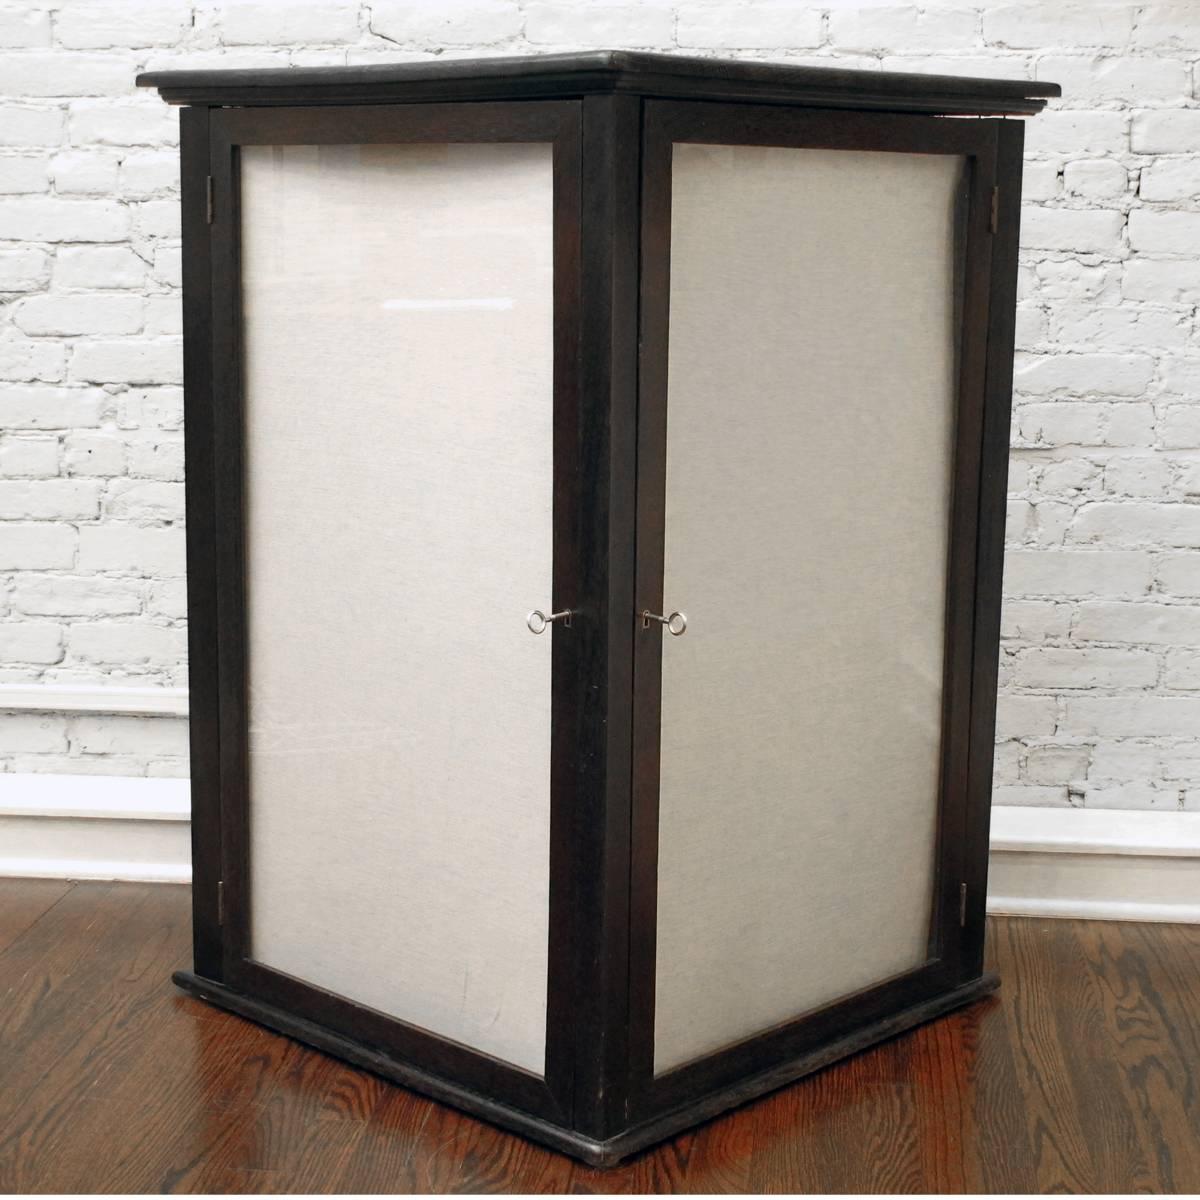 Triangular oak store display case, comprised of two shallow display cabinets with glass doors, and a storage cabinet with three fixed shelves behind a paneled door. Refinished, and with new nickel skeleton keys/locks. Originally for displaying